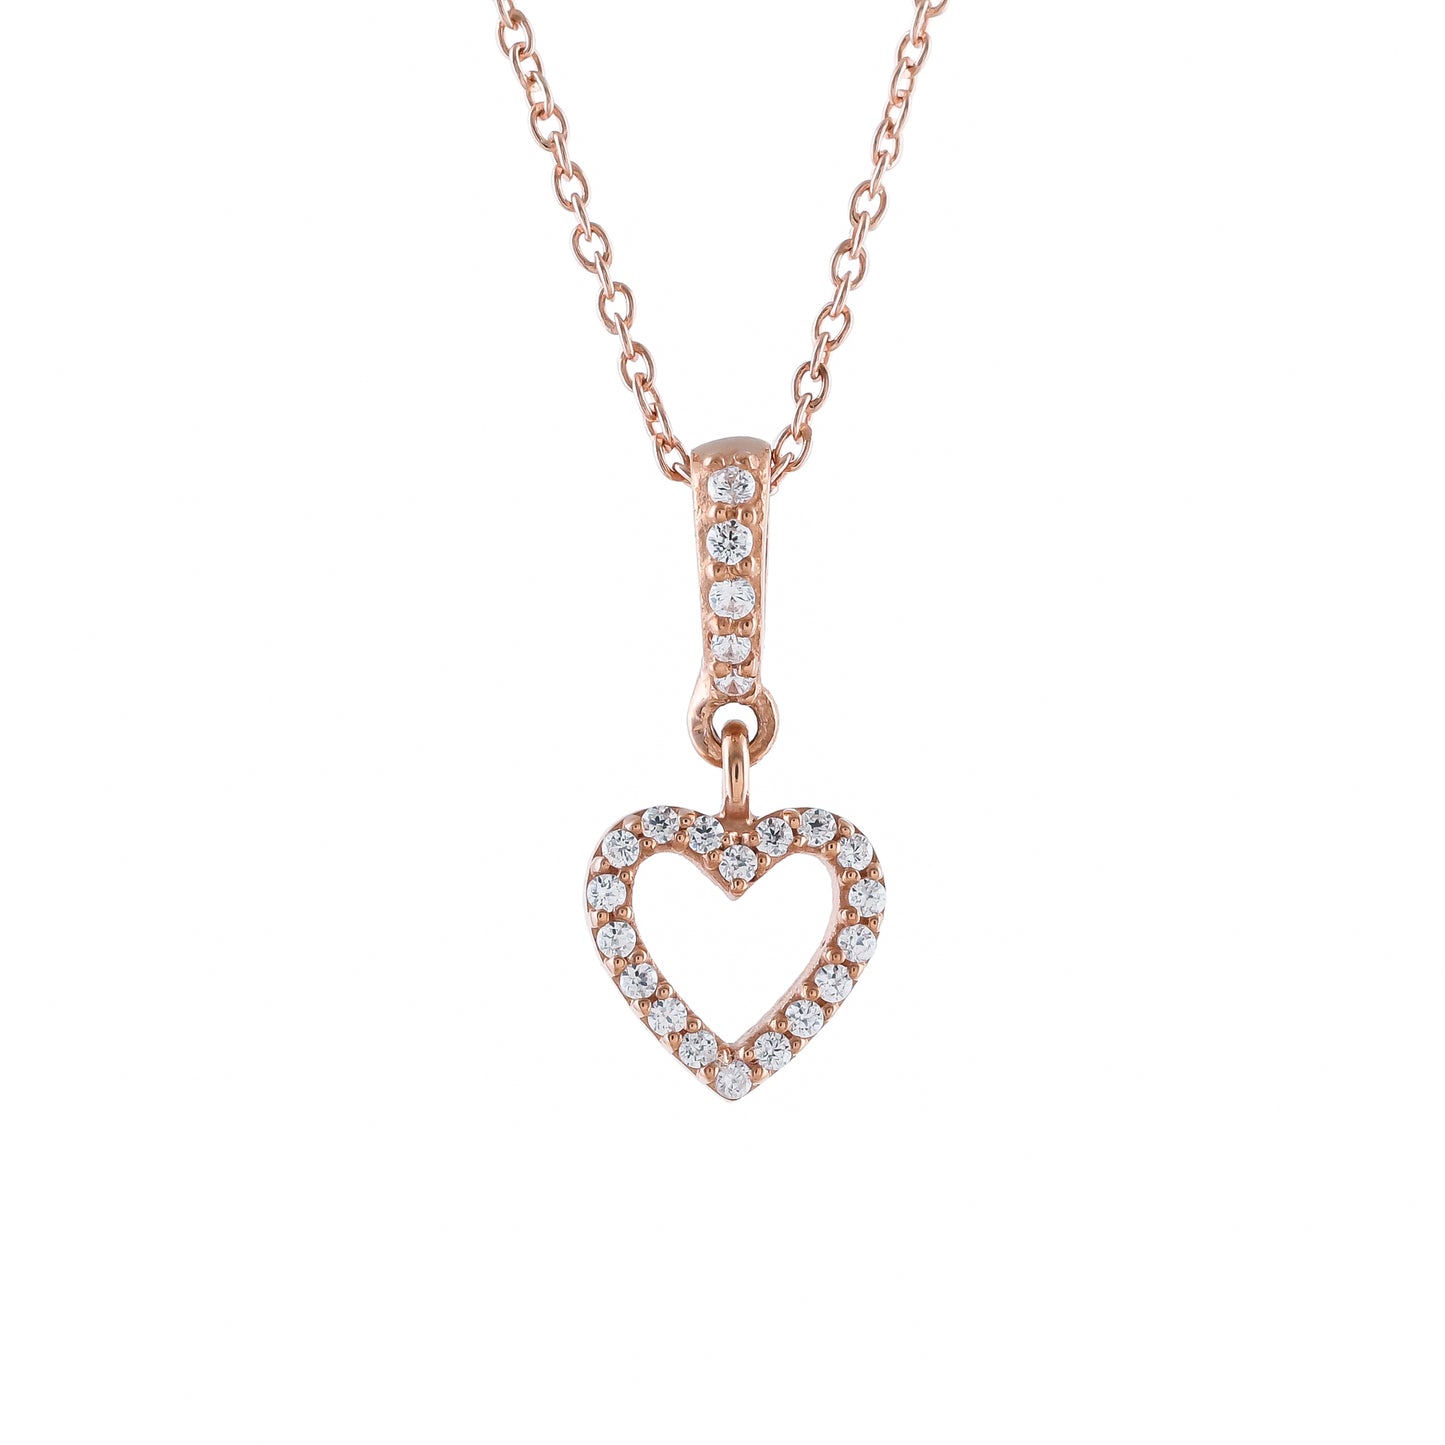 Heart Cz Silver Necklace - From Purl Purl